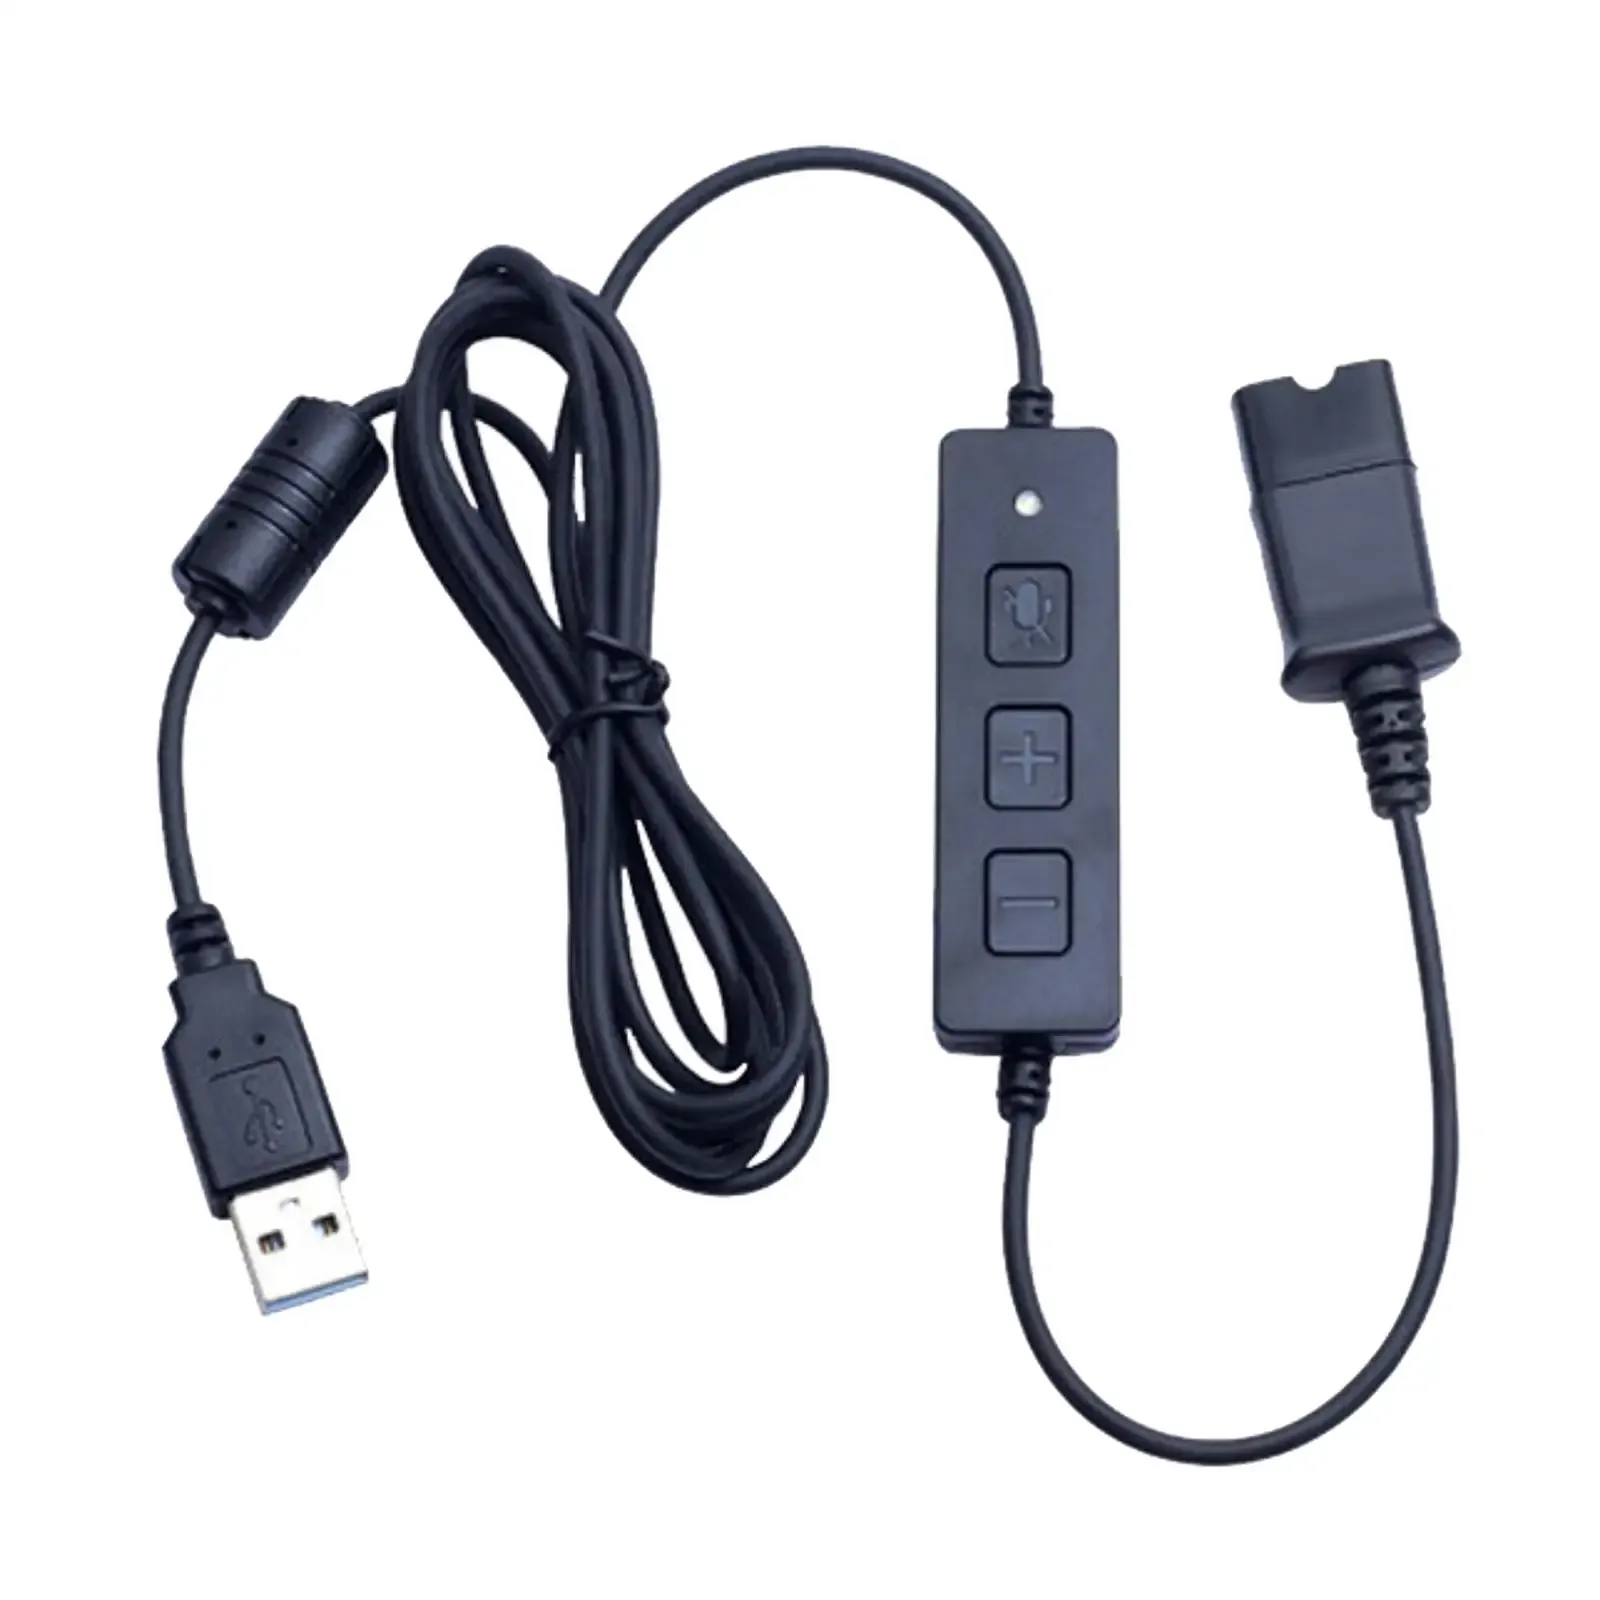 Headset Quick Disconnect Qd Connector Qd Cable to USB Plug for for 